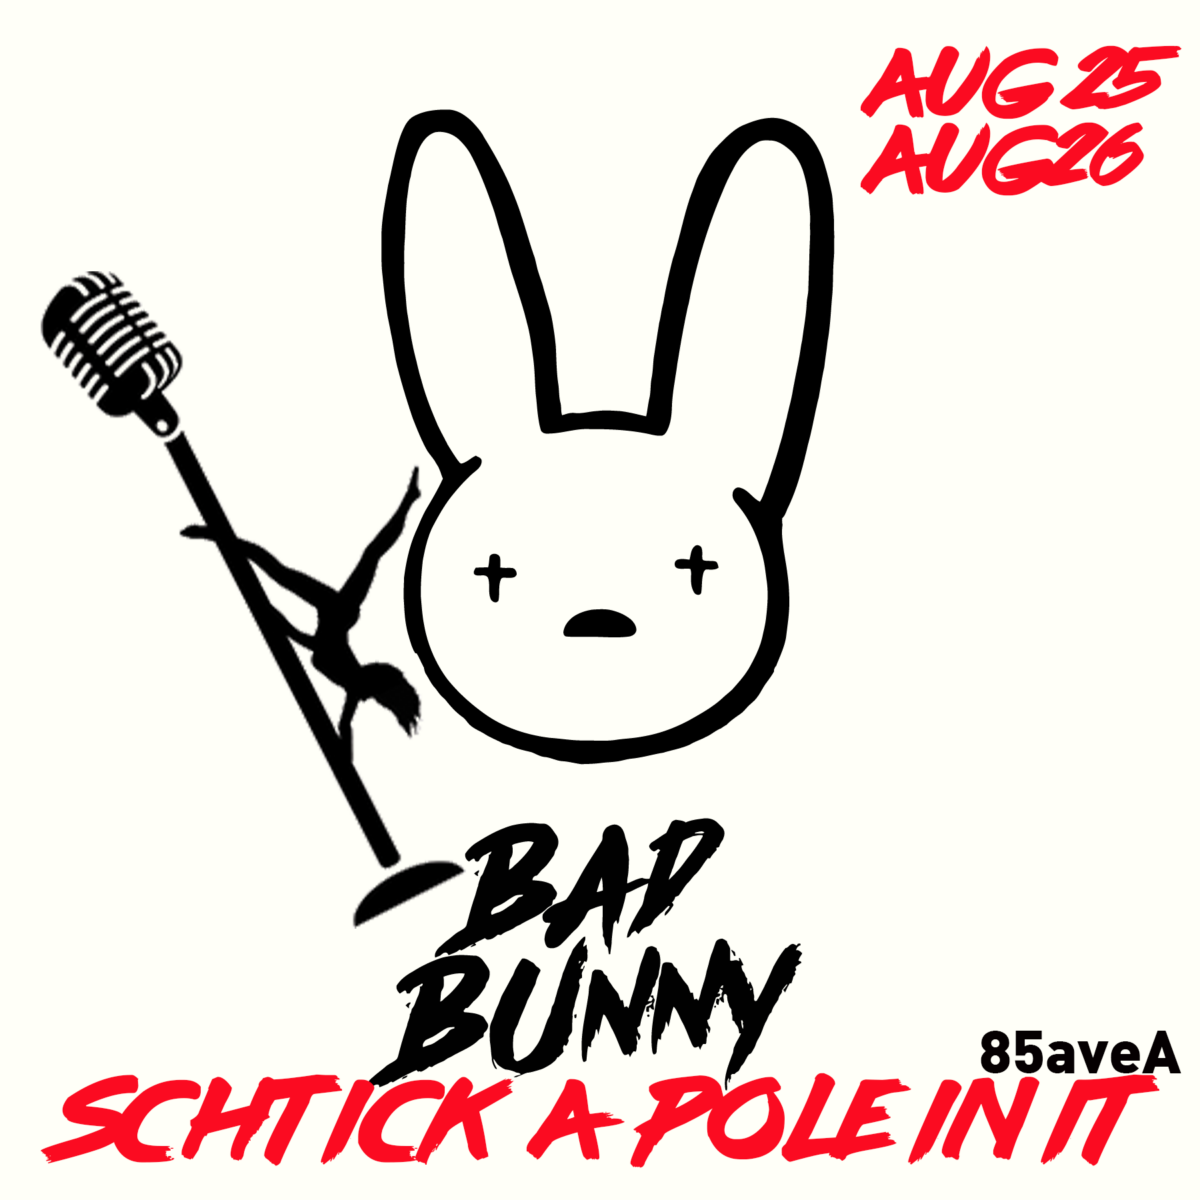 Schtick a Pole In It Bad Bunny